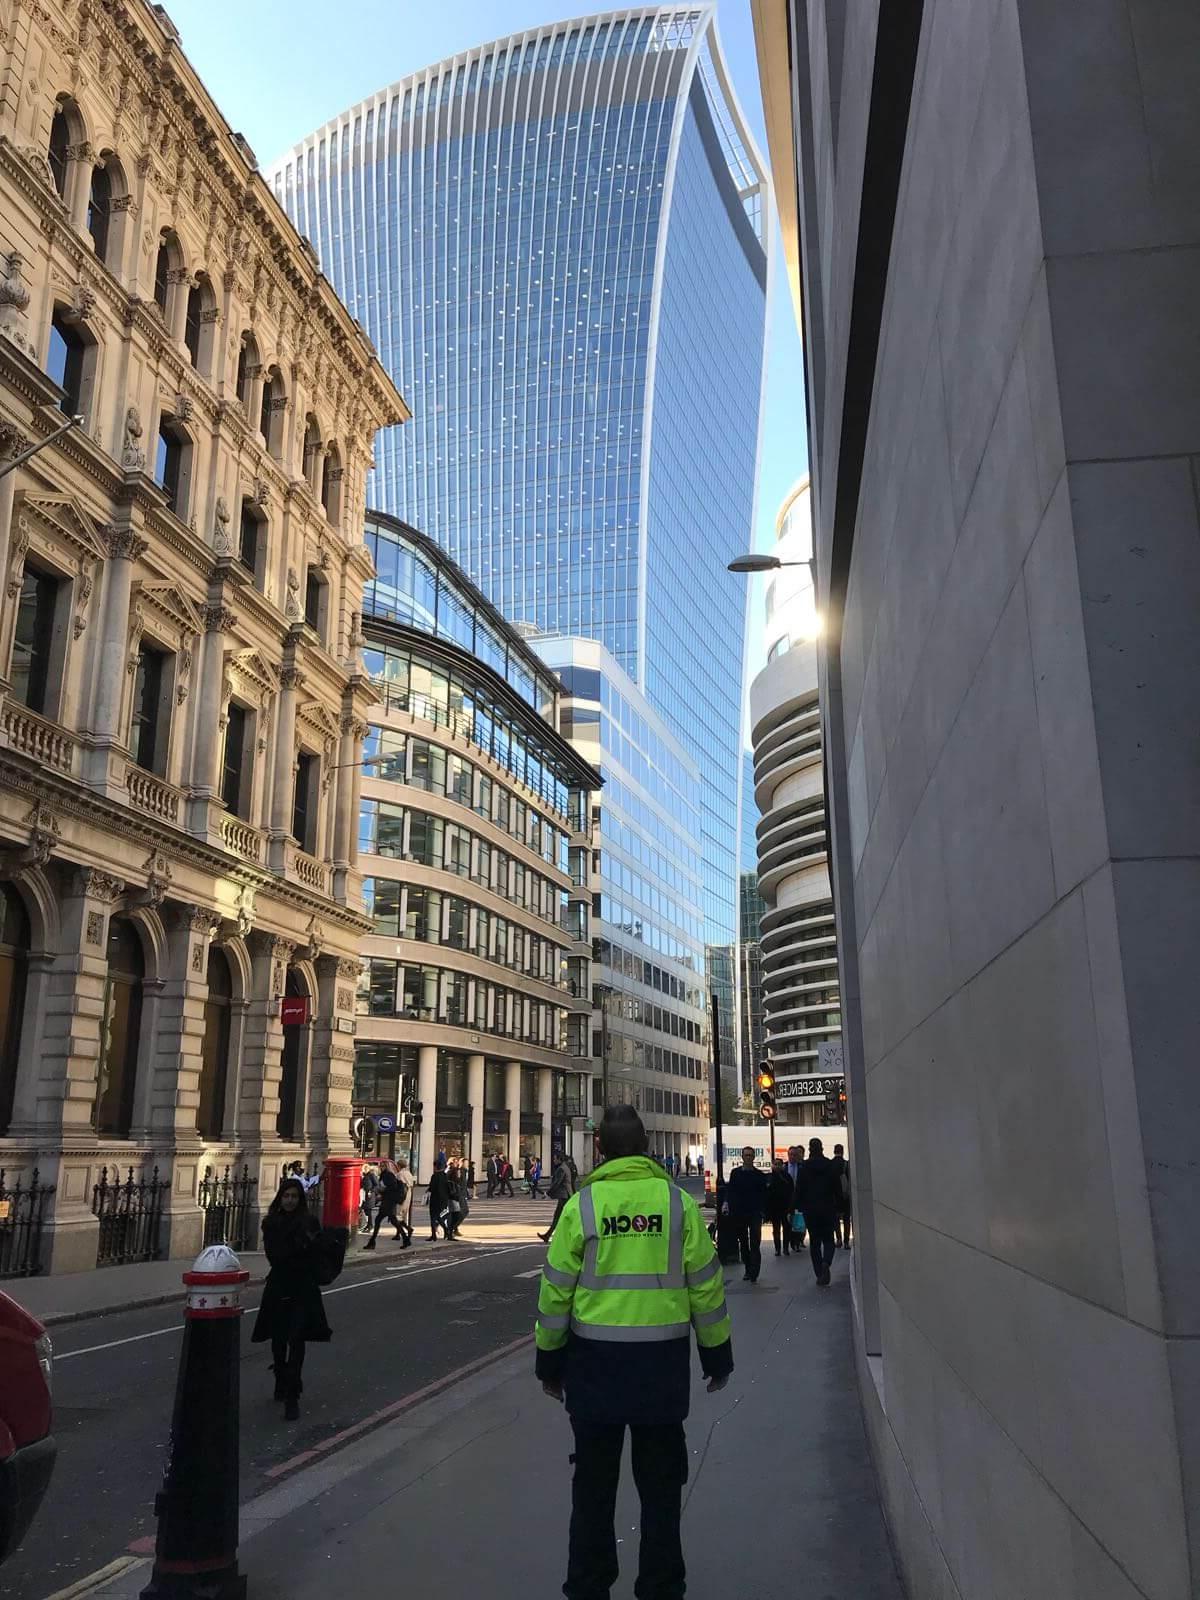 A 岩石电源连接 employee in a hi vis jacket, looking up at a London skyscraper building